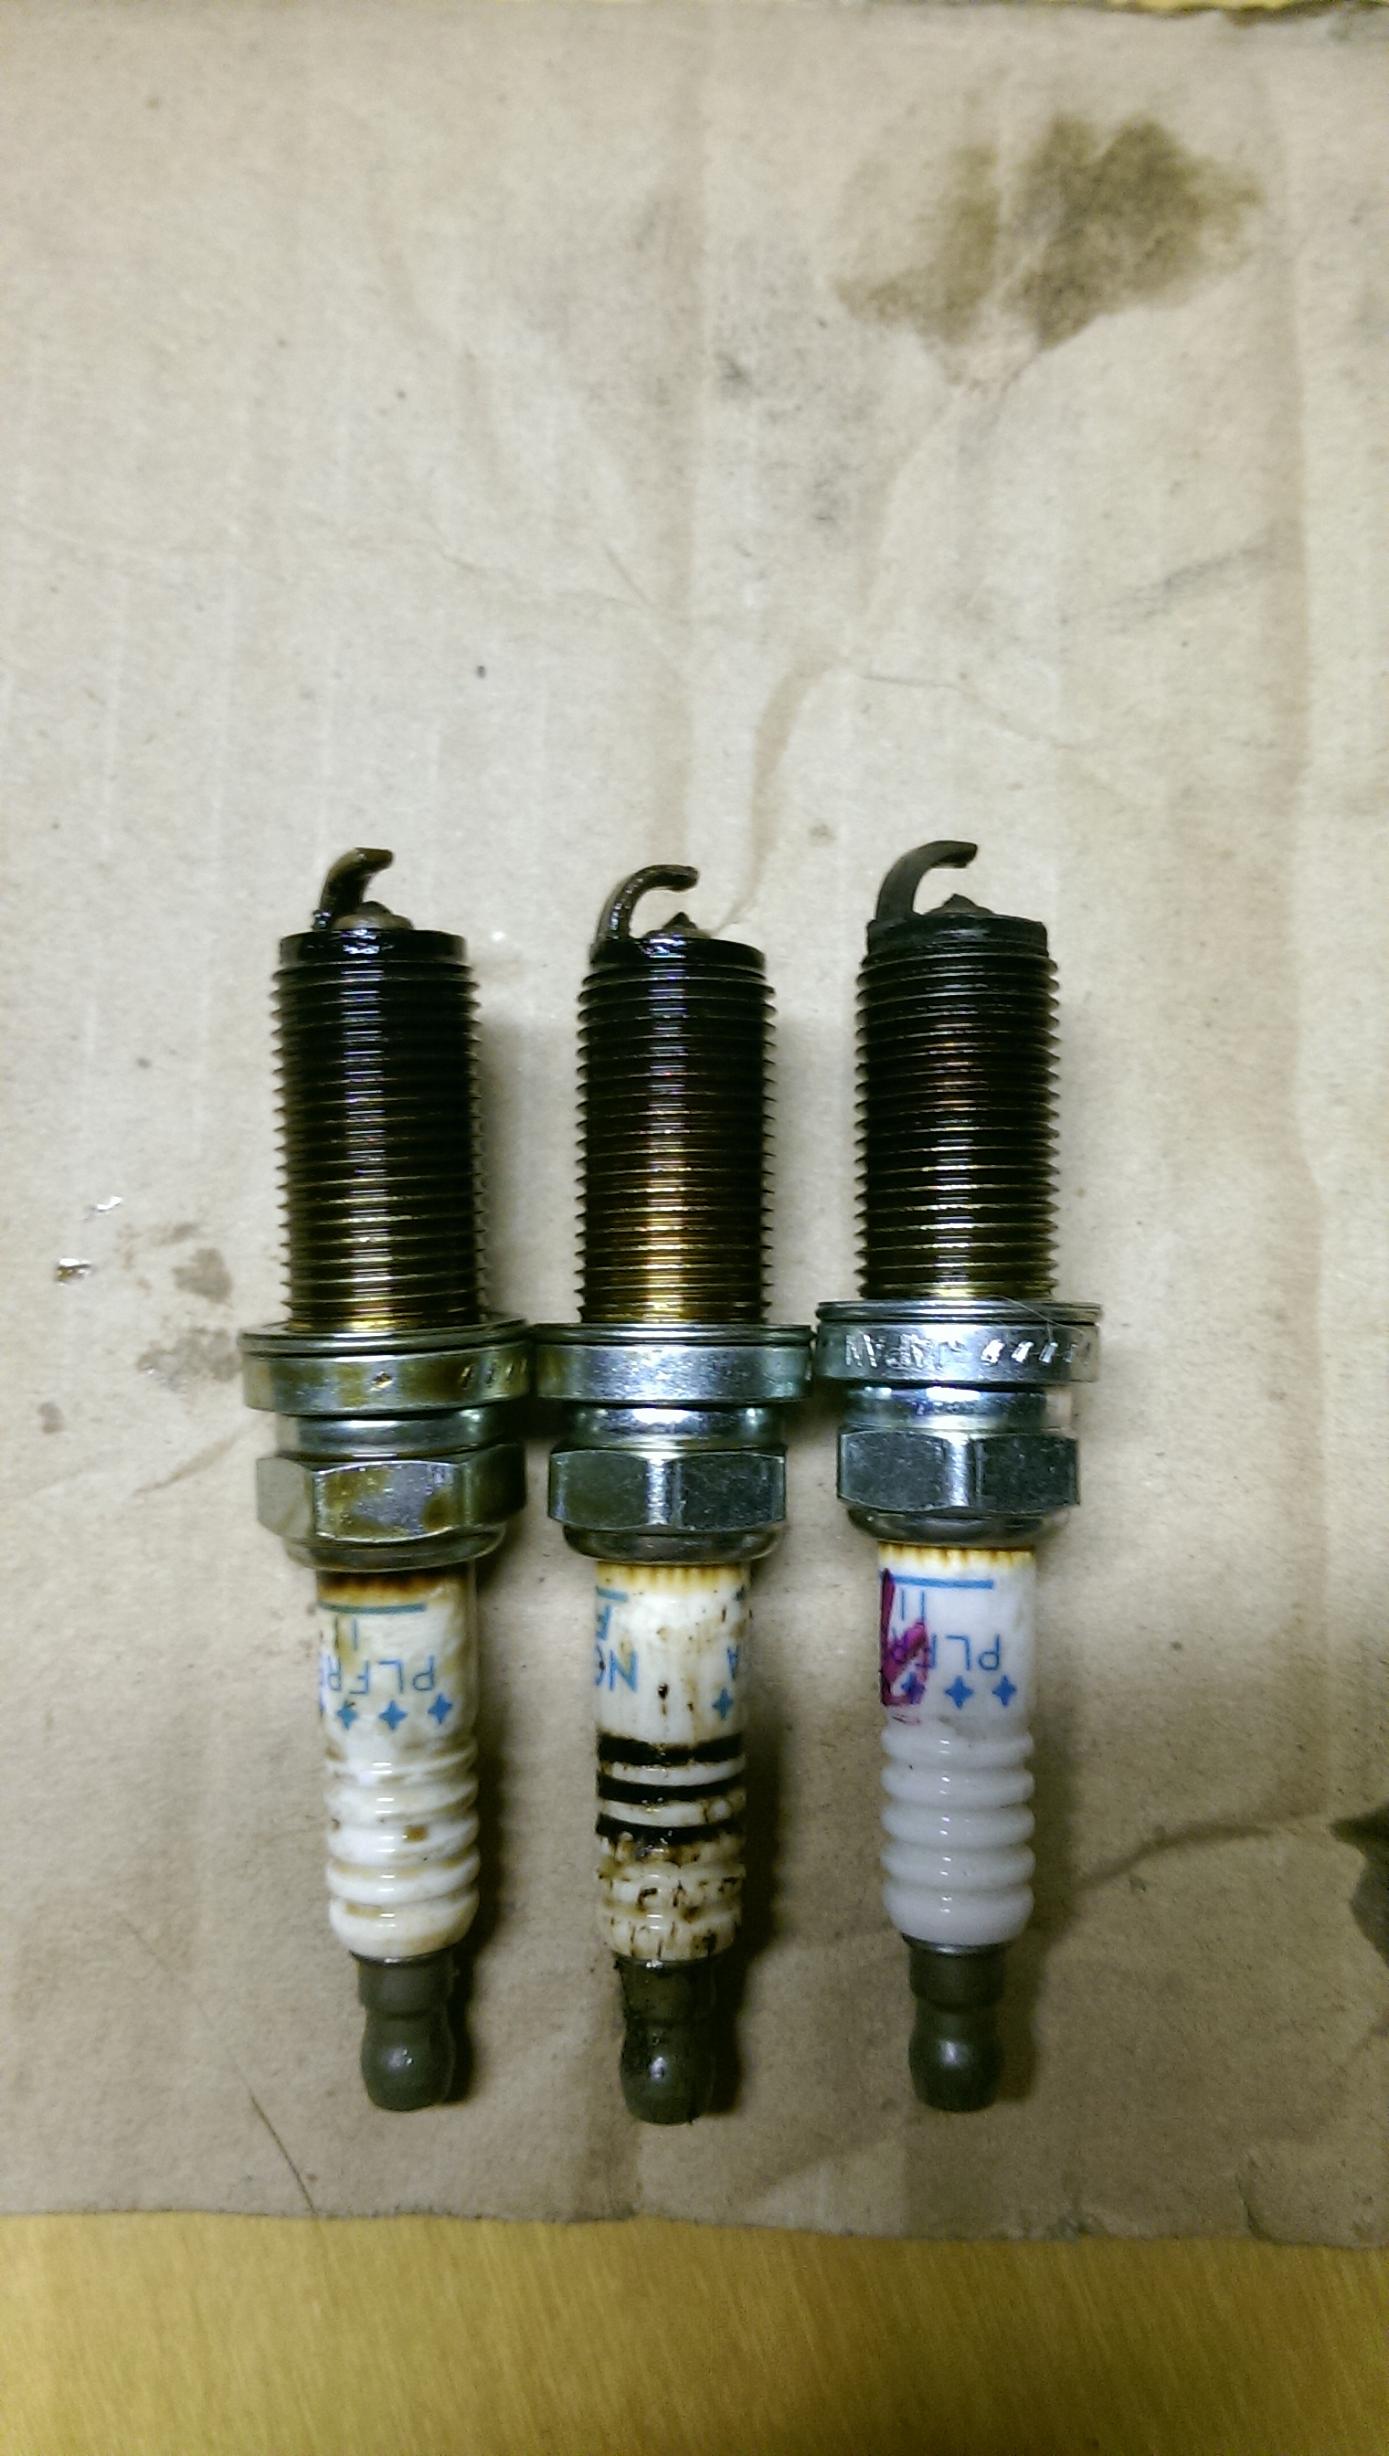 Oil in spark plug cylinder. - Page 4 - G35Driver - Infiniti G35 & G37 ...